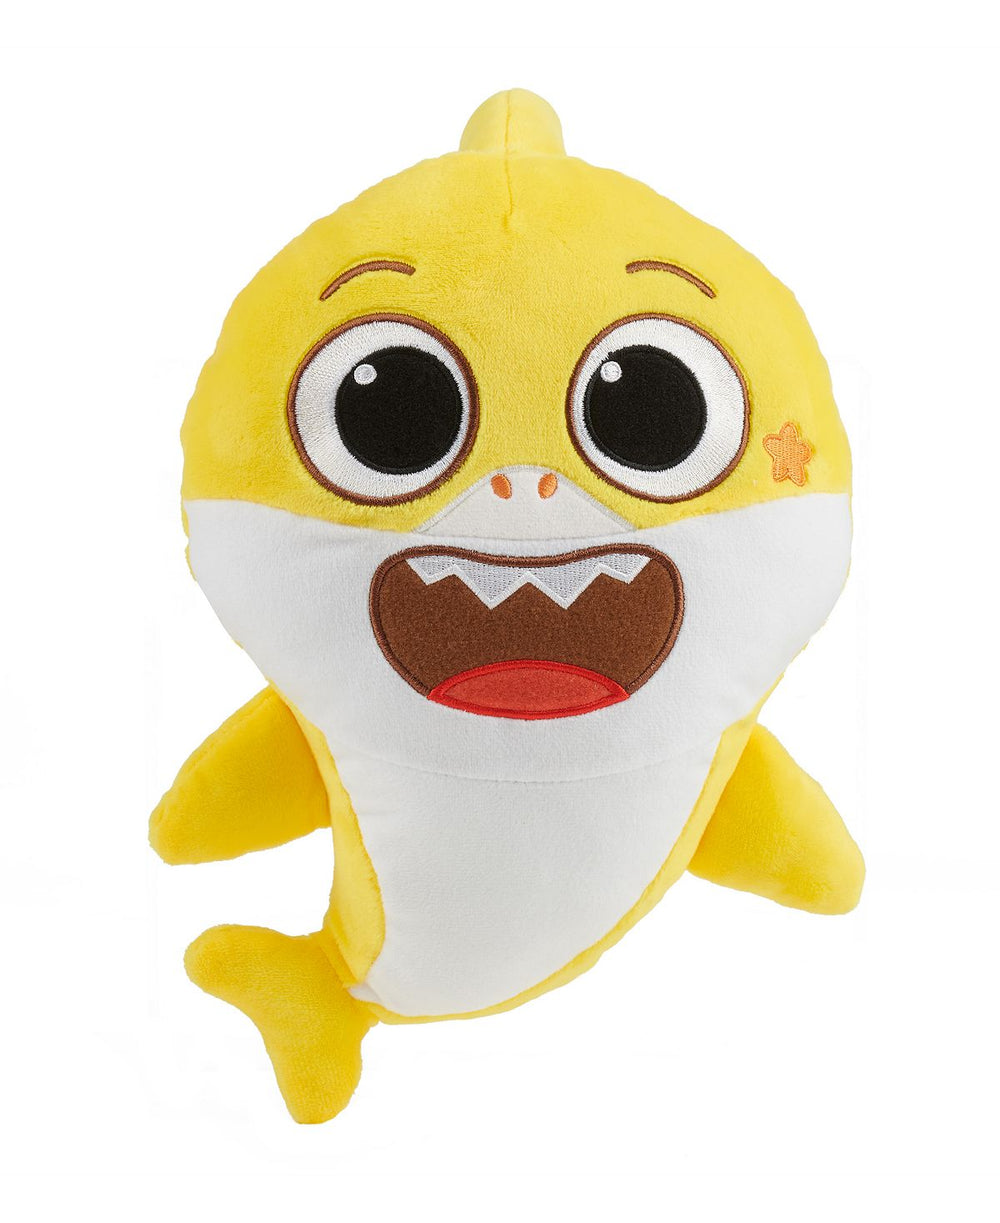 Baby Shark Big Show 12 inch Interactive Fin Friend Plush with Sound